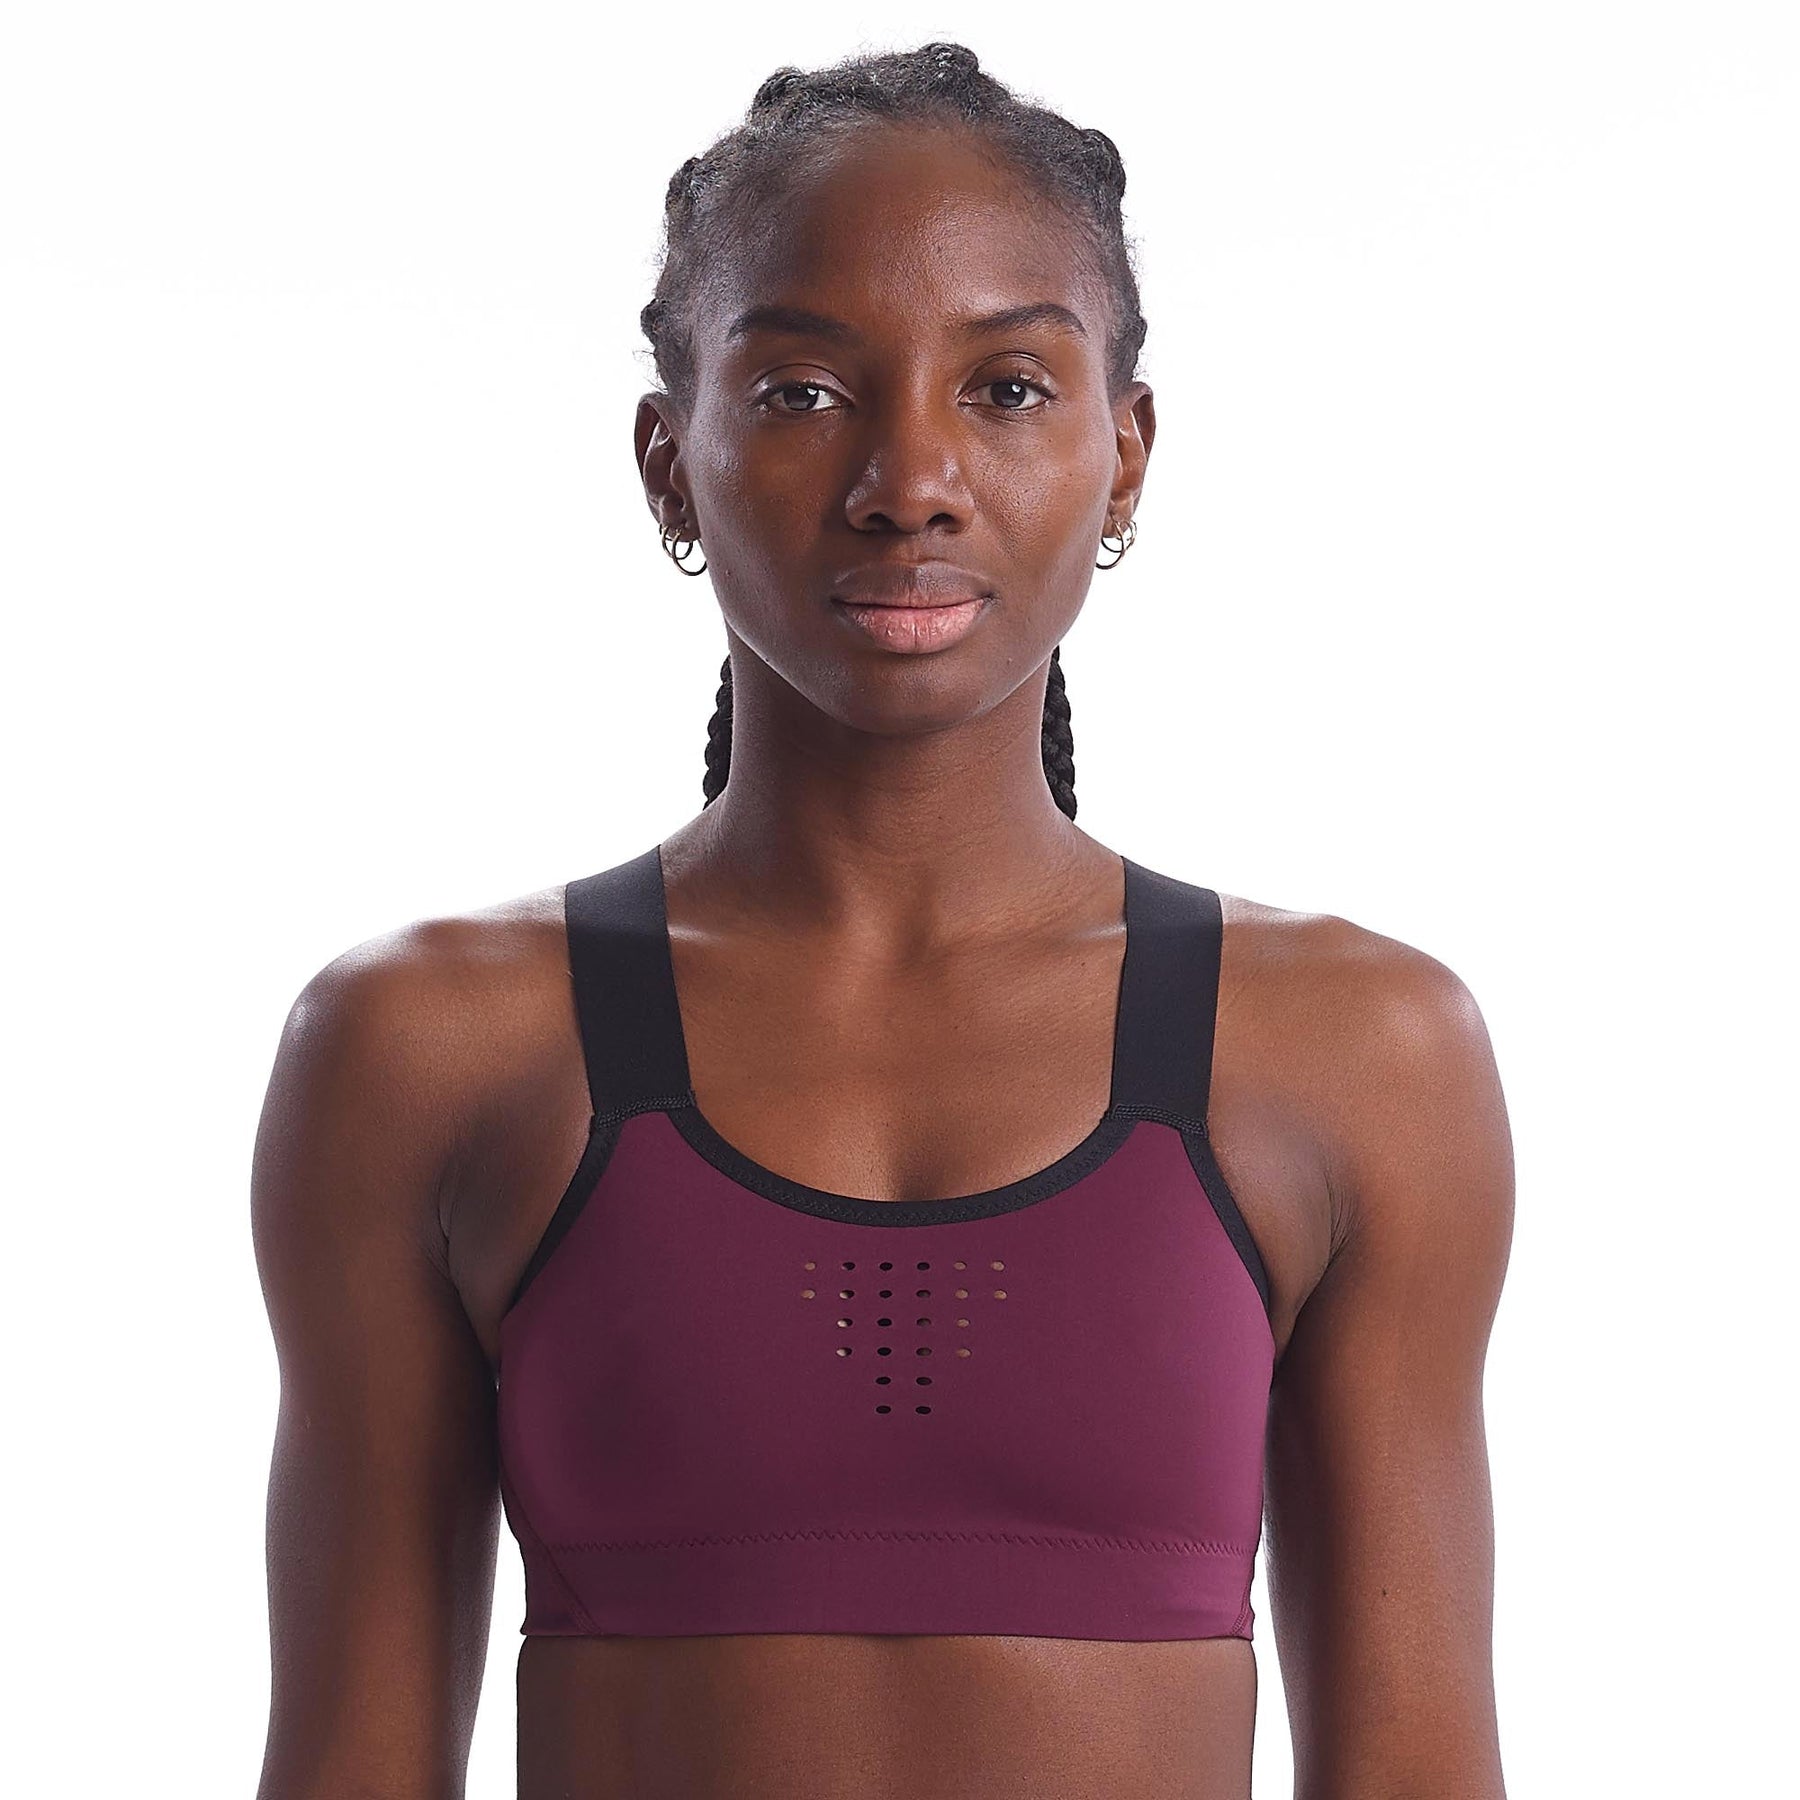 L, Under armour, Sports bras, Womens sports clothing, Sports & leisure